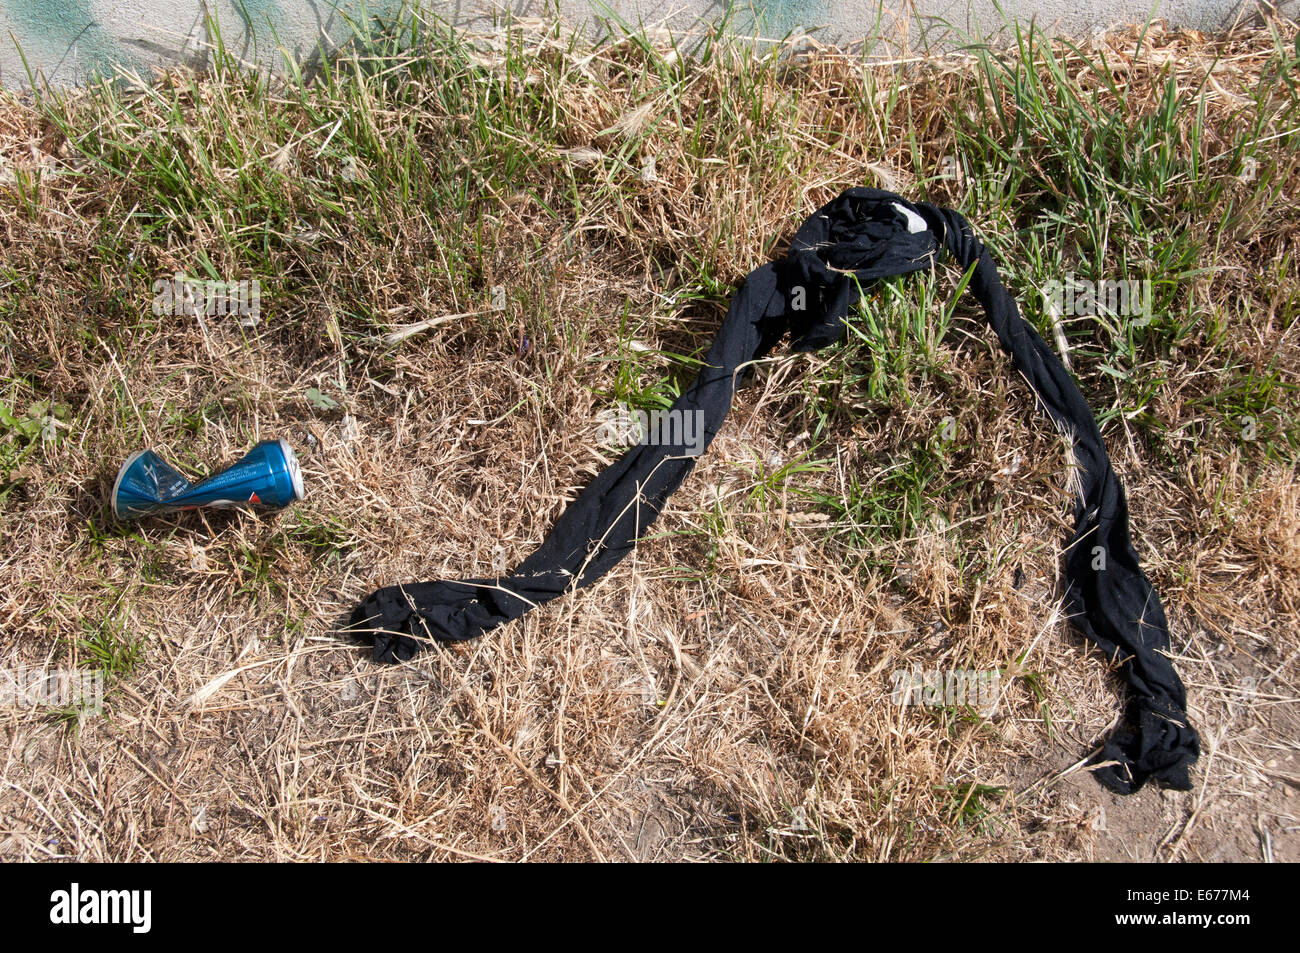 https://c8.alamy.com/comp/E677M4/the-next-morning-abandoned-tights-and-beer-can-beside-the-canal-E677M4.jpg